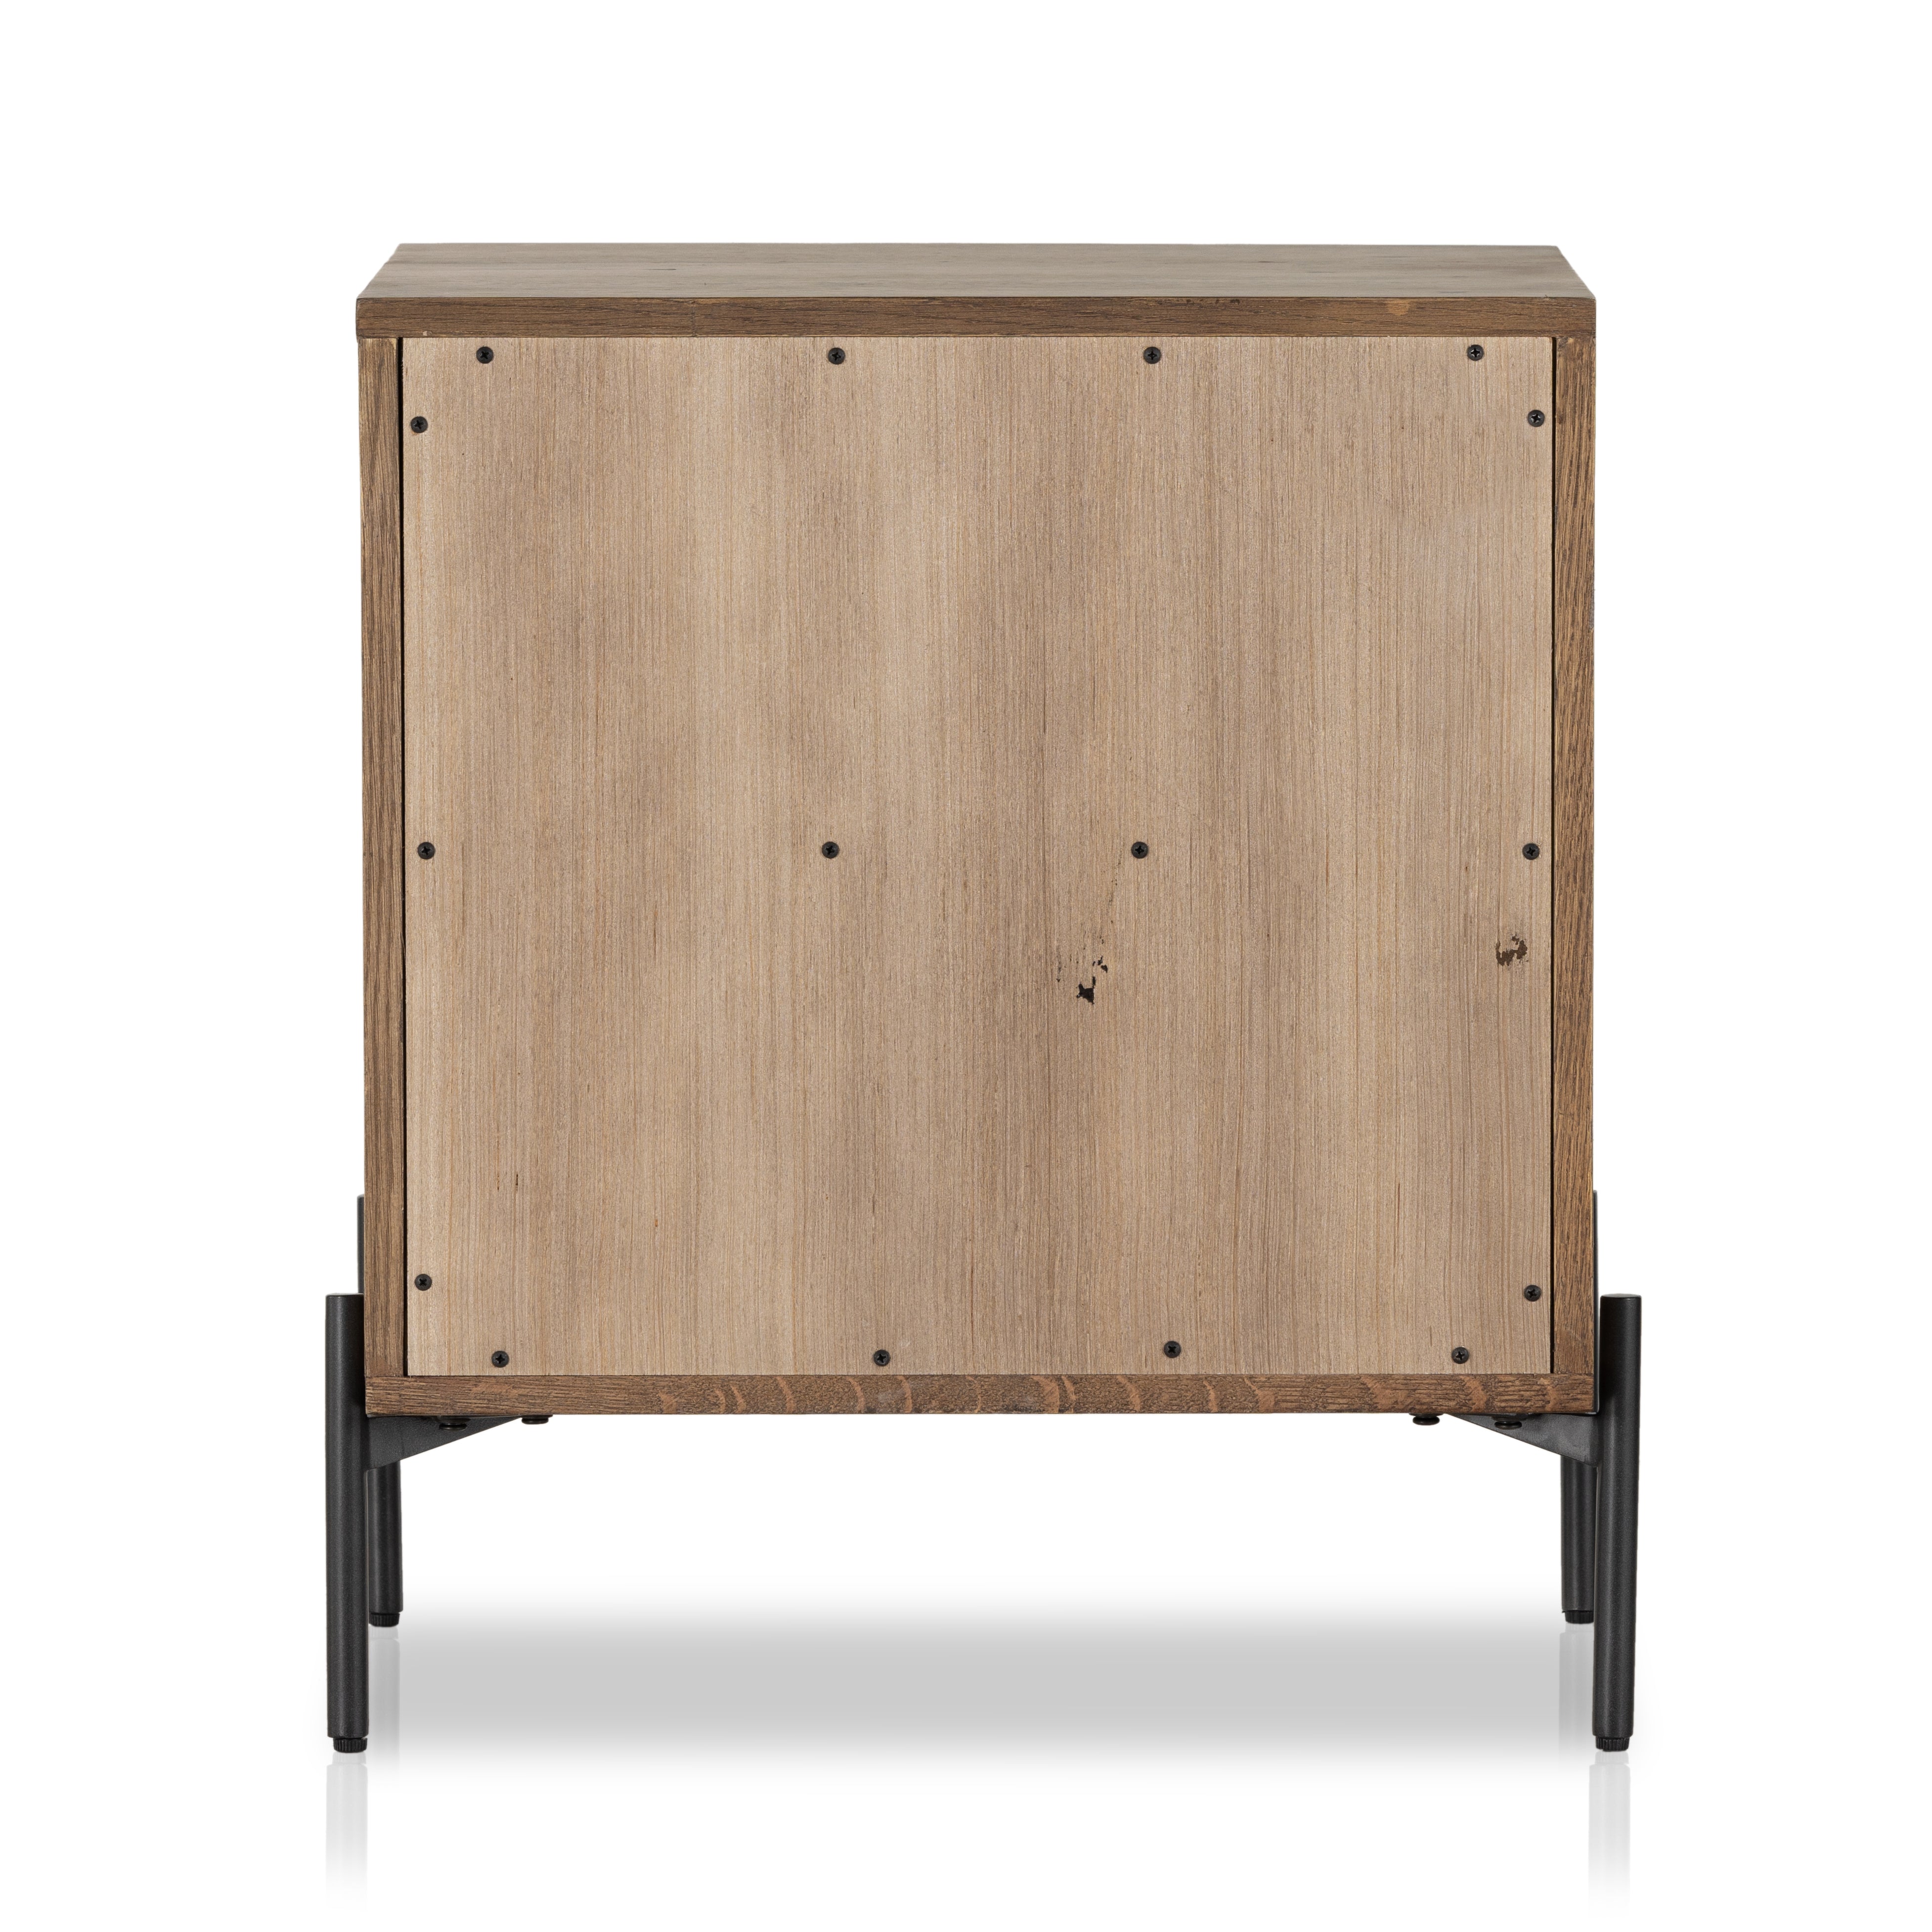 The Eaton Amber Oak Resin Nightstand boasts a classic, timeless style with its intricate details and warm oak finish. Crafted from durable resin, it's the perfect accent piece for your home. Amethyst Home provides interior design, new construction, custom furniture, and area rugs in the Houston metro area.